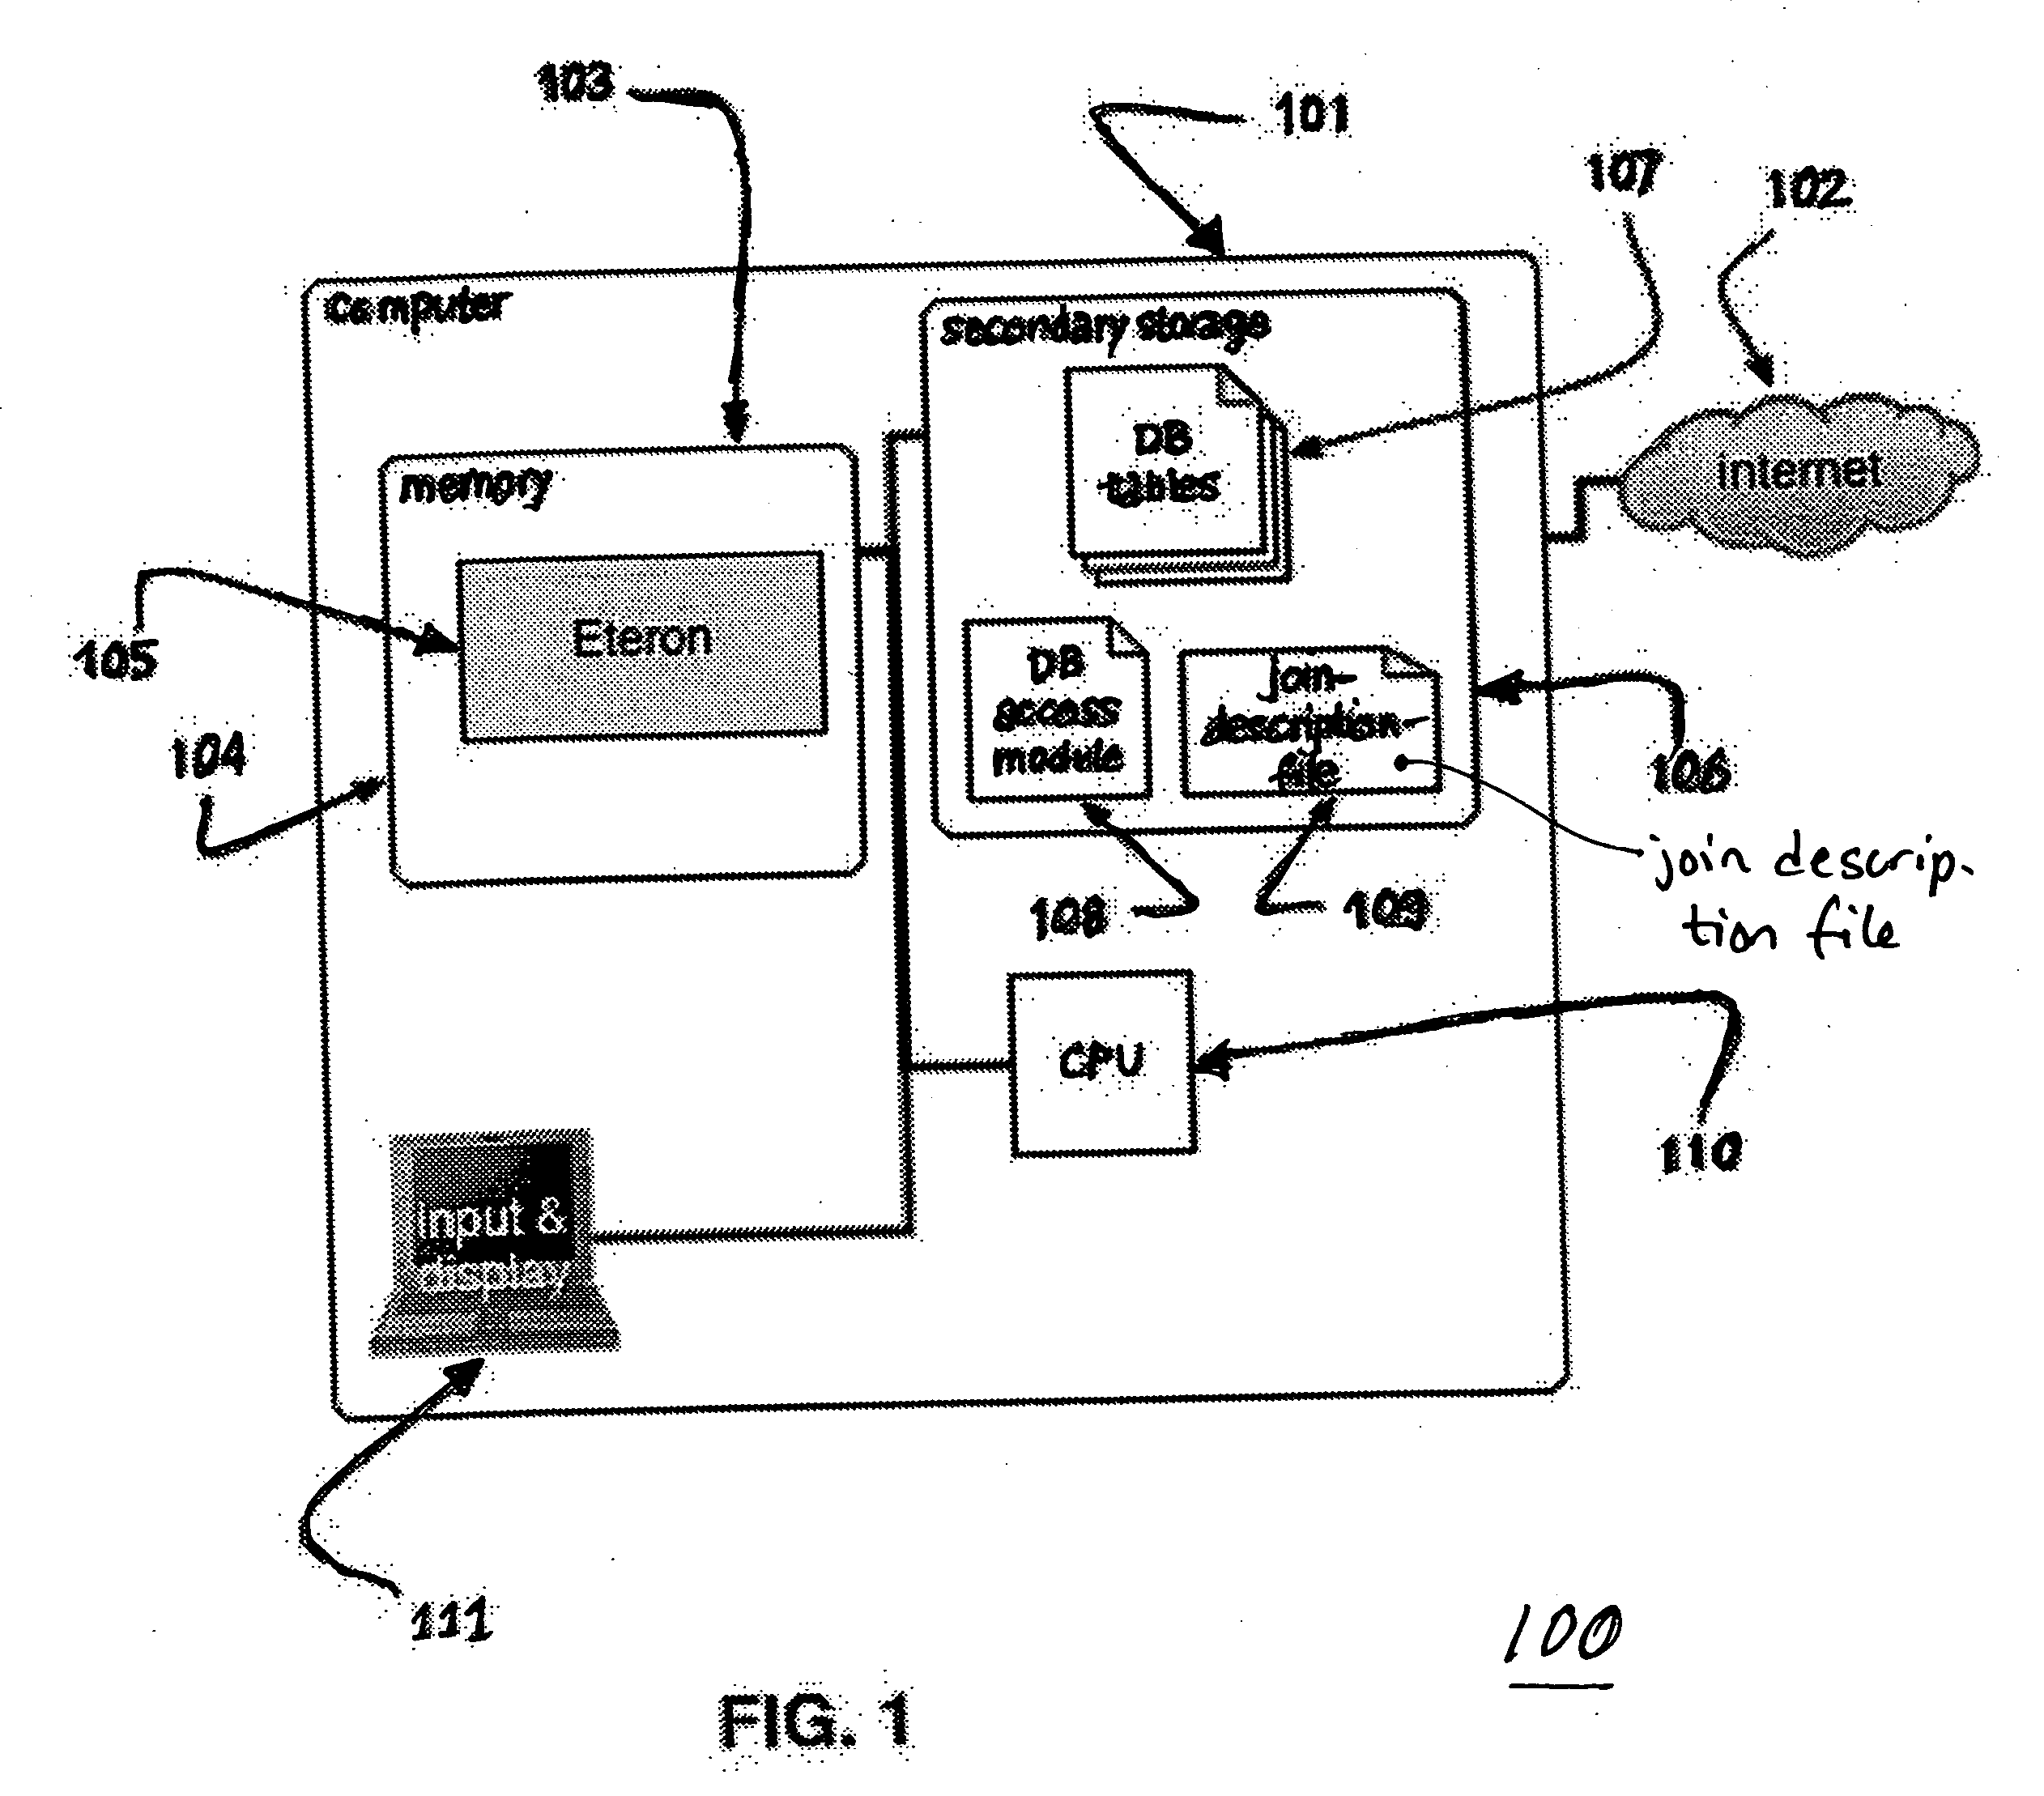 Method and apparatus for temporal database